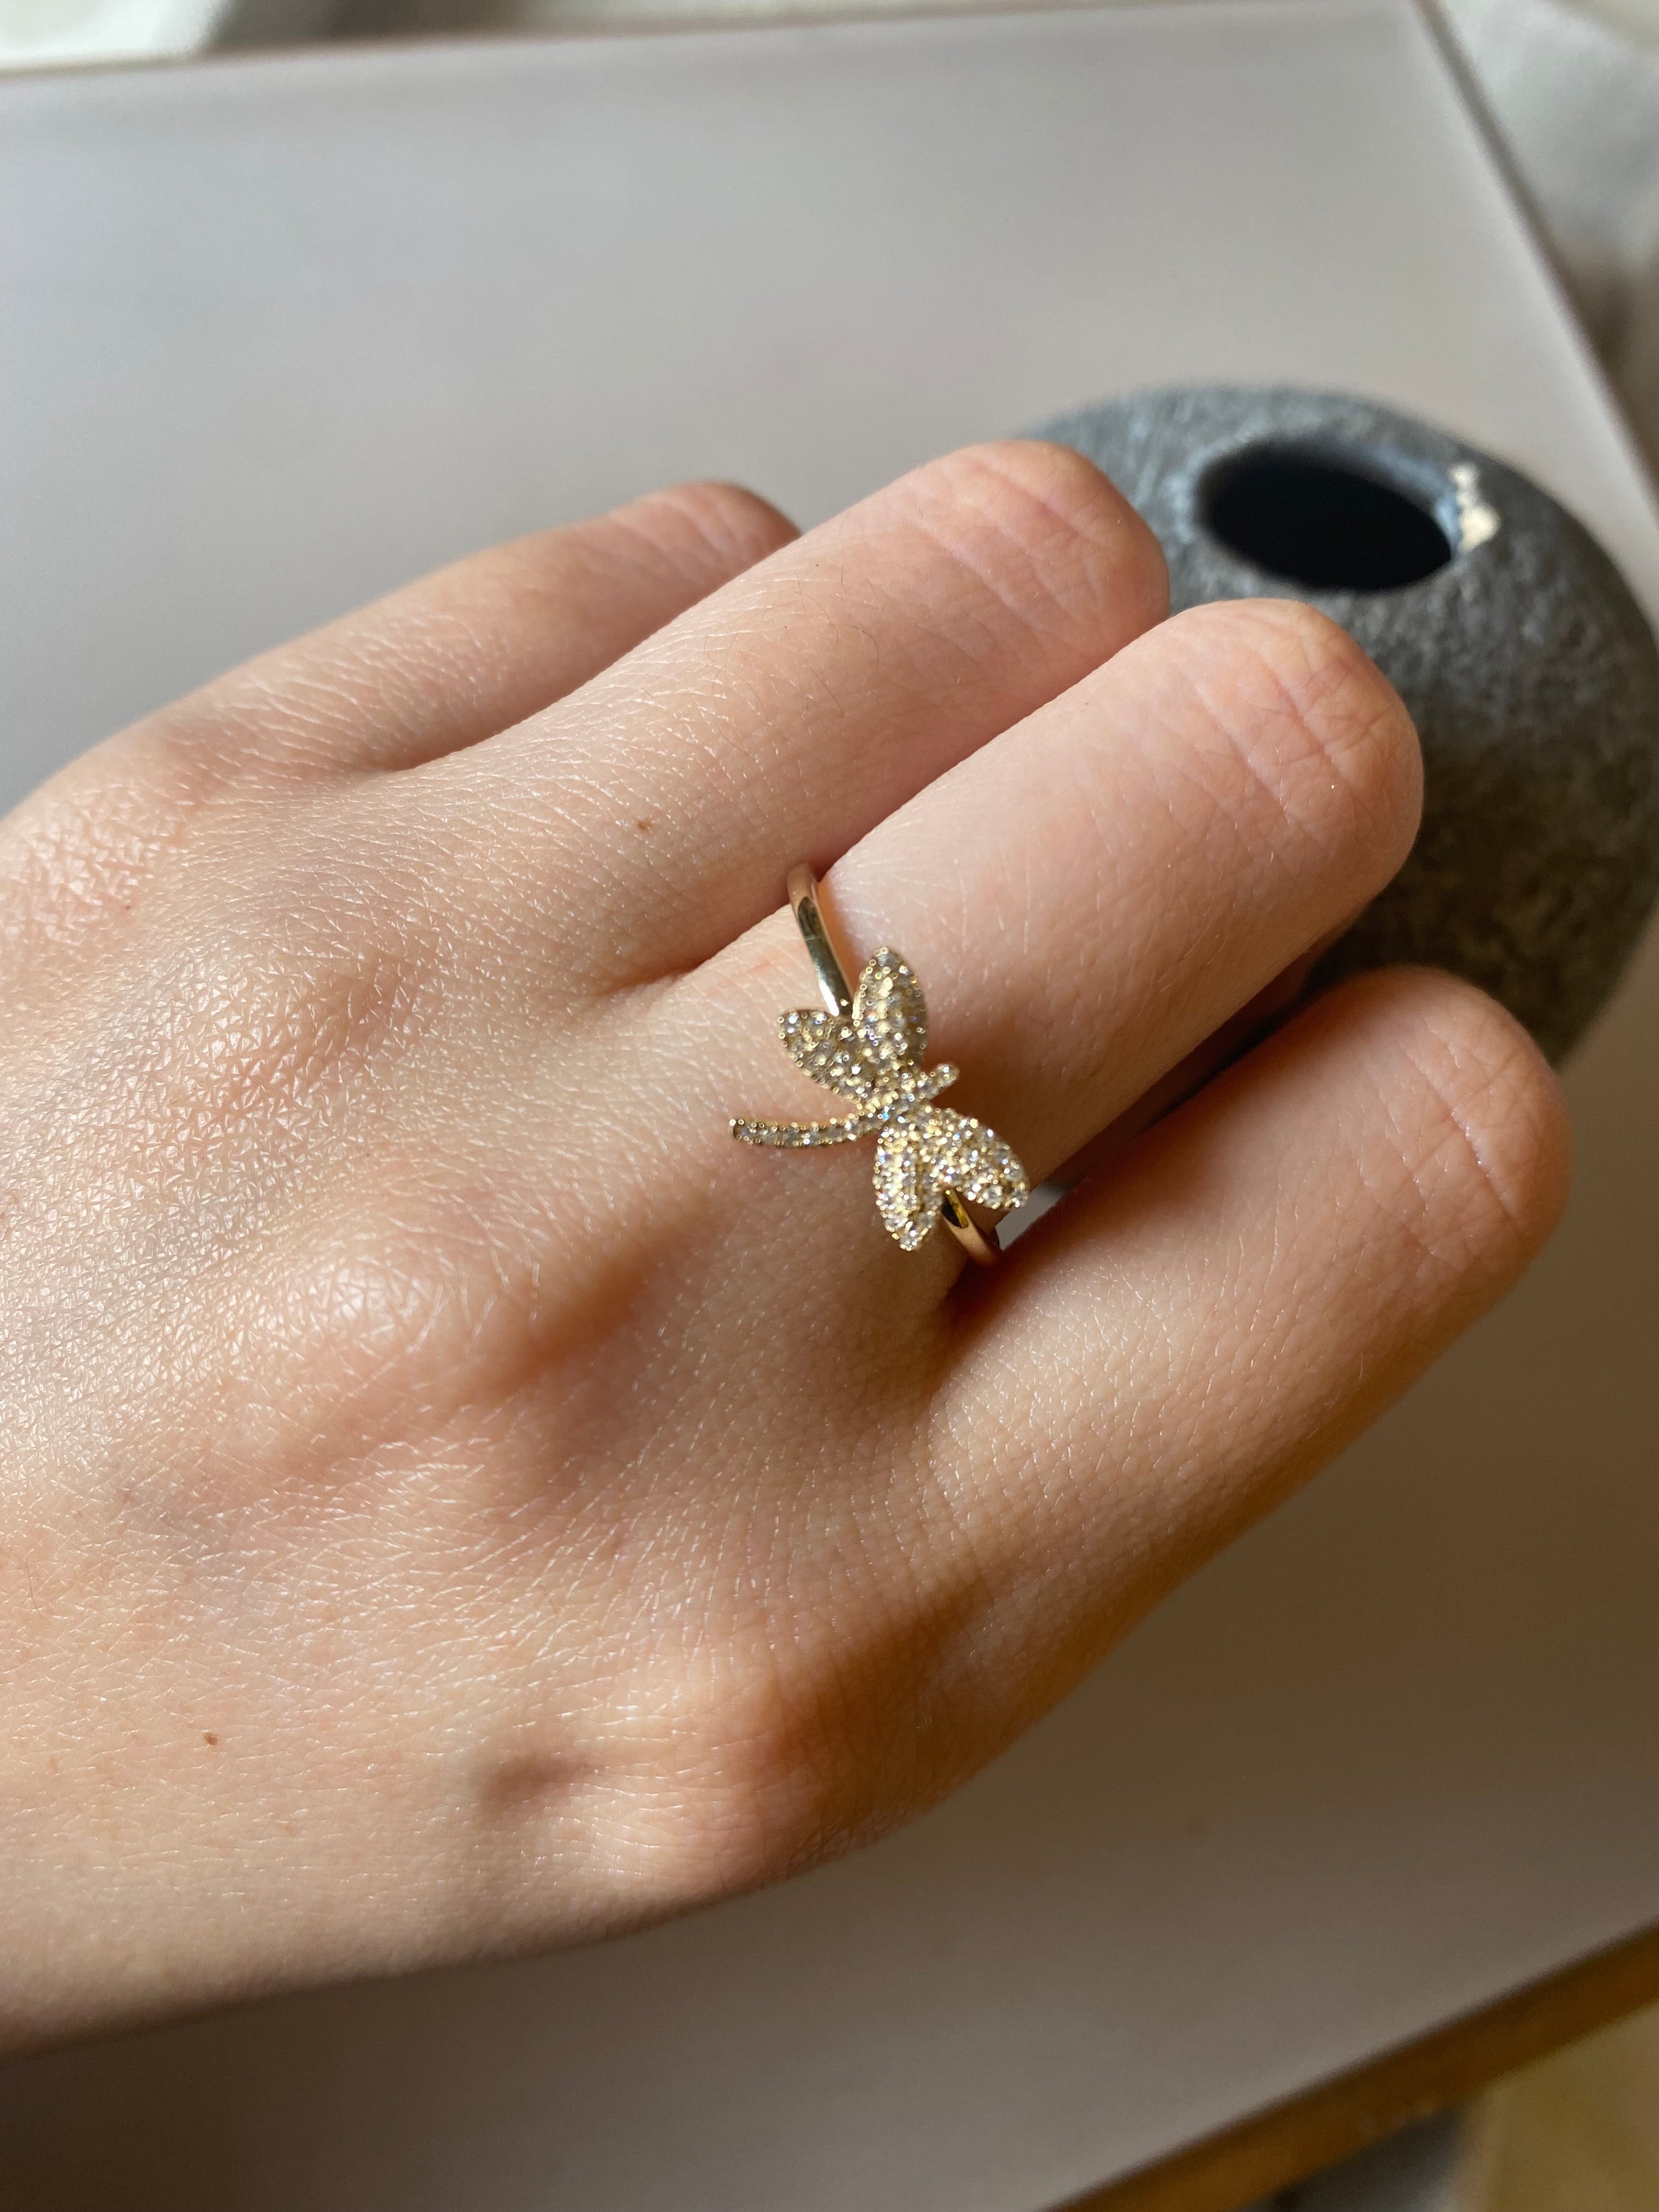 Pave Diamond Butterfly Gold Ring